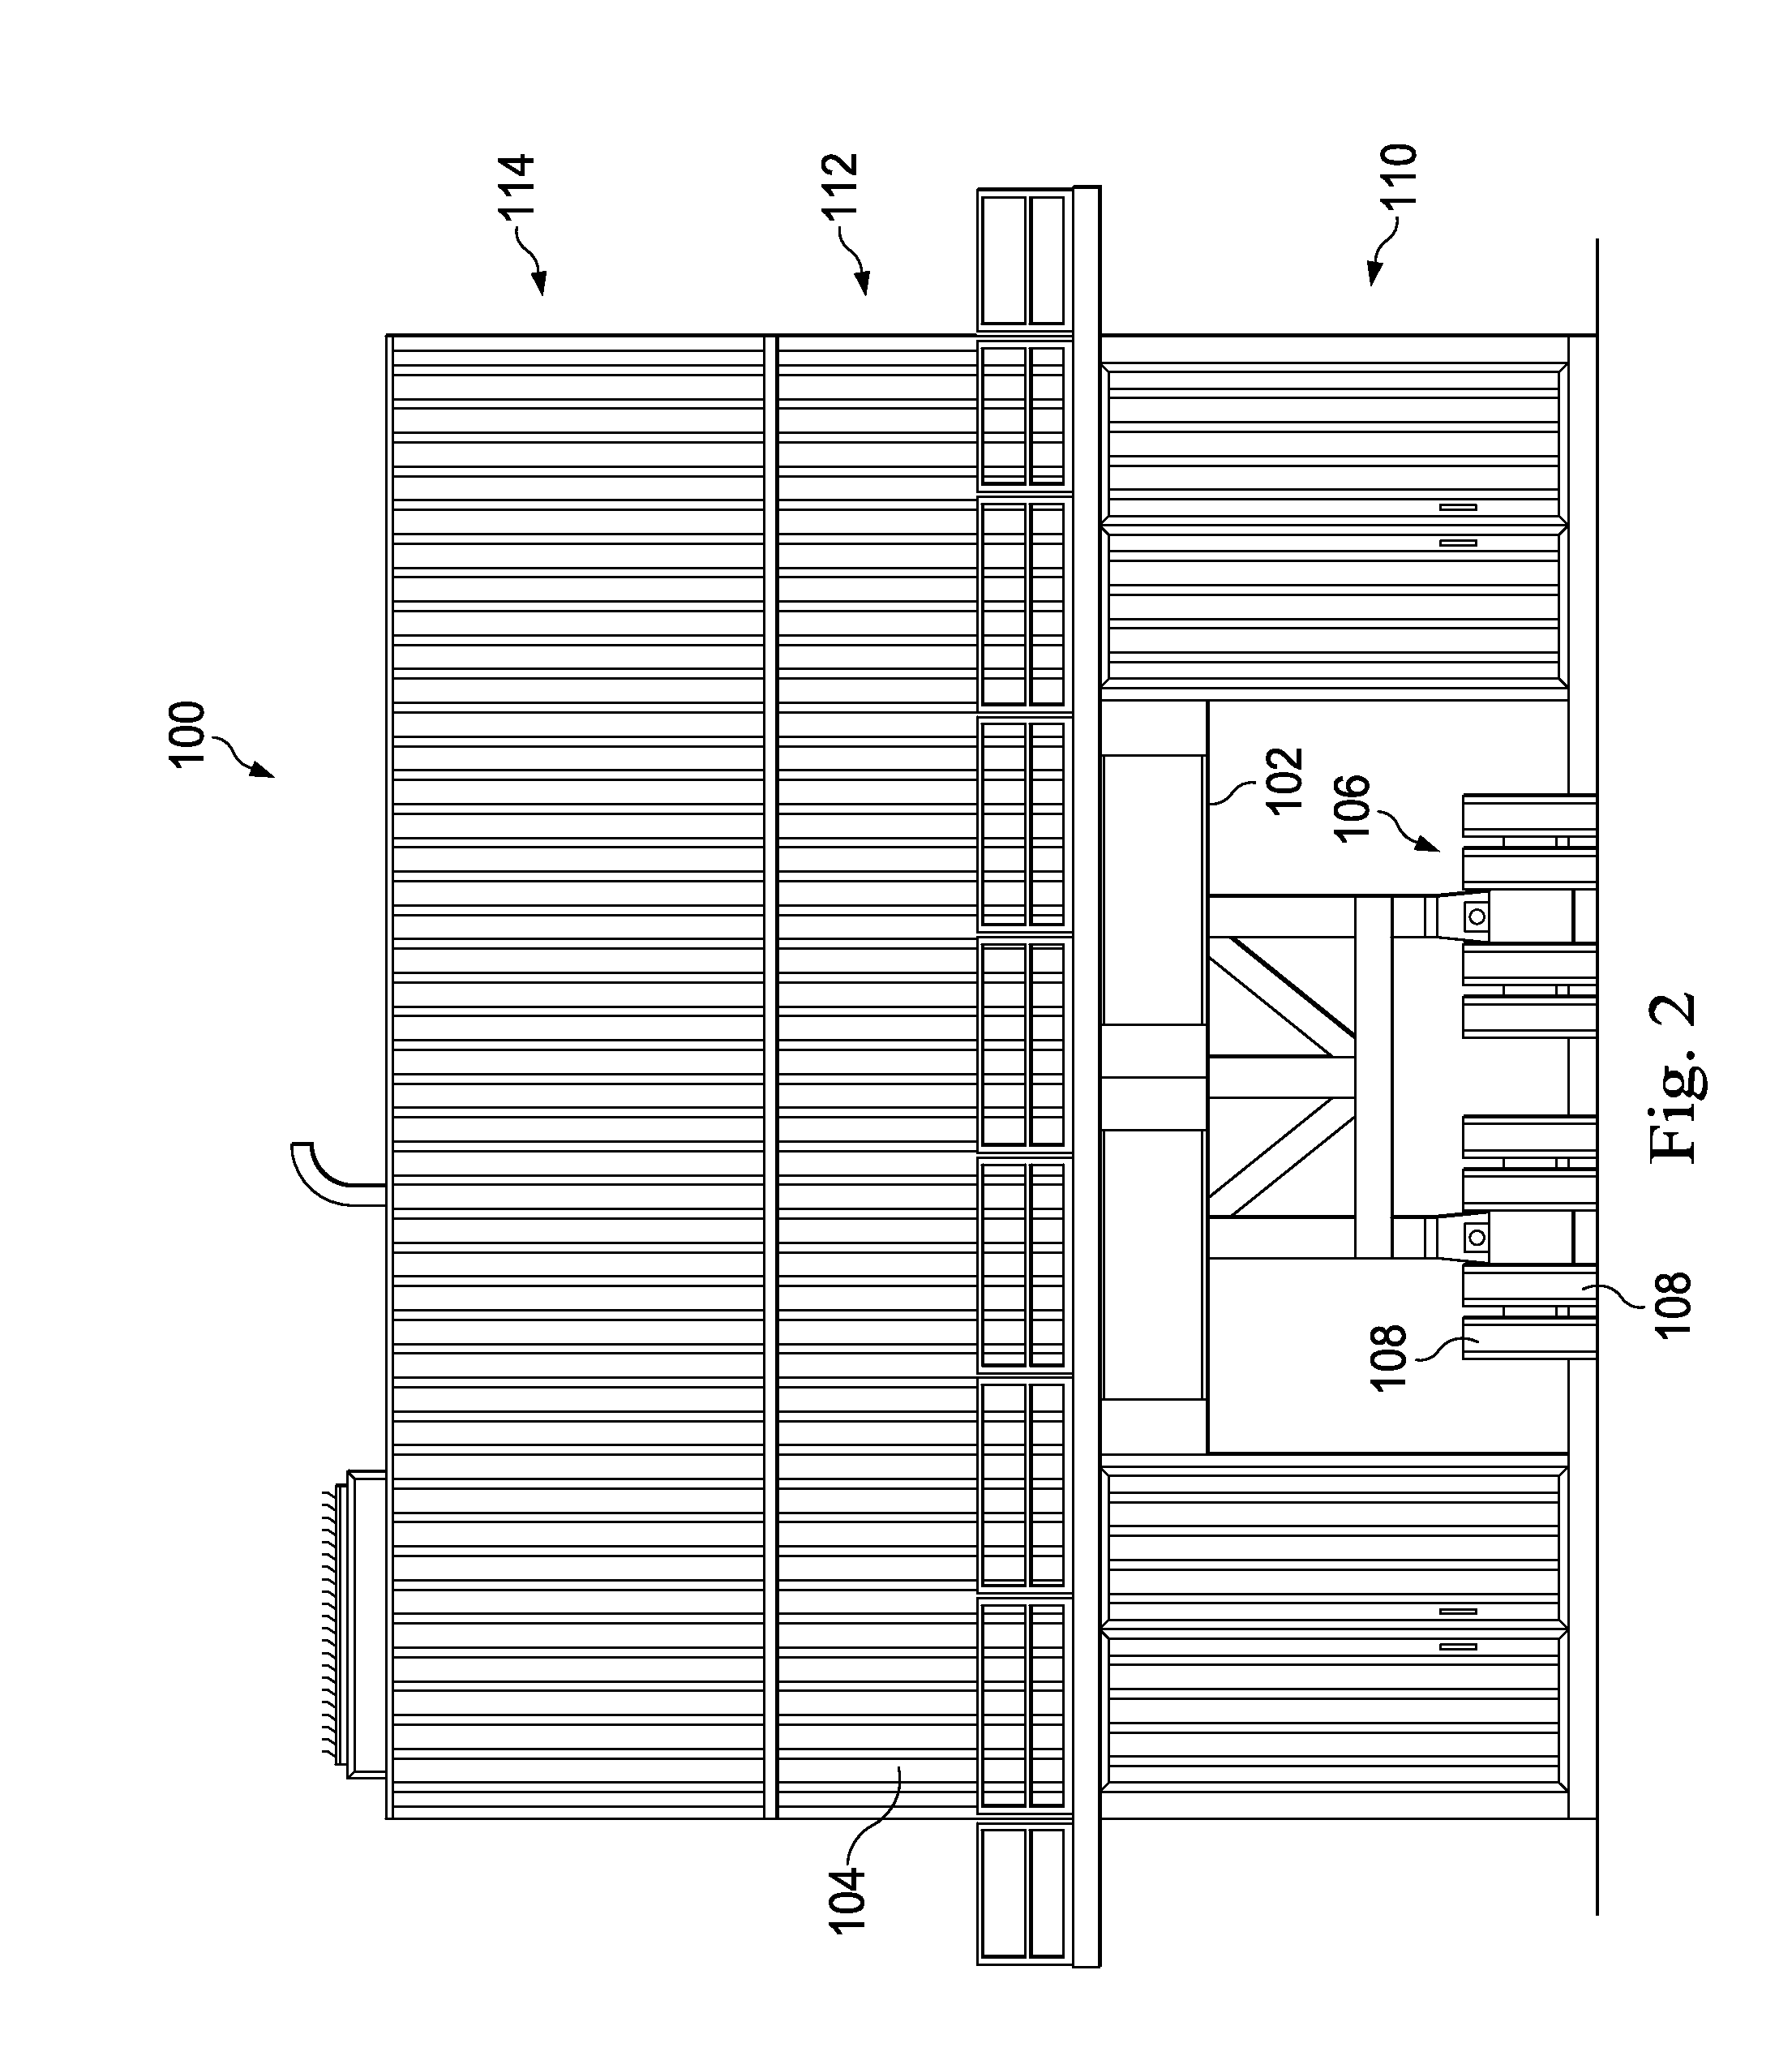 Integrated Arctic Fracking Apparatus and Methods